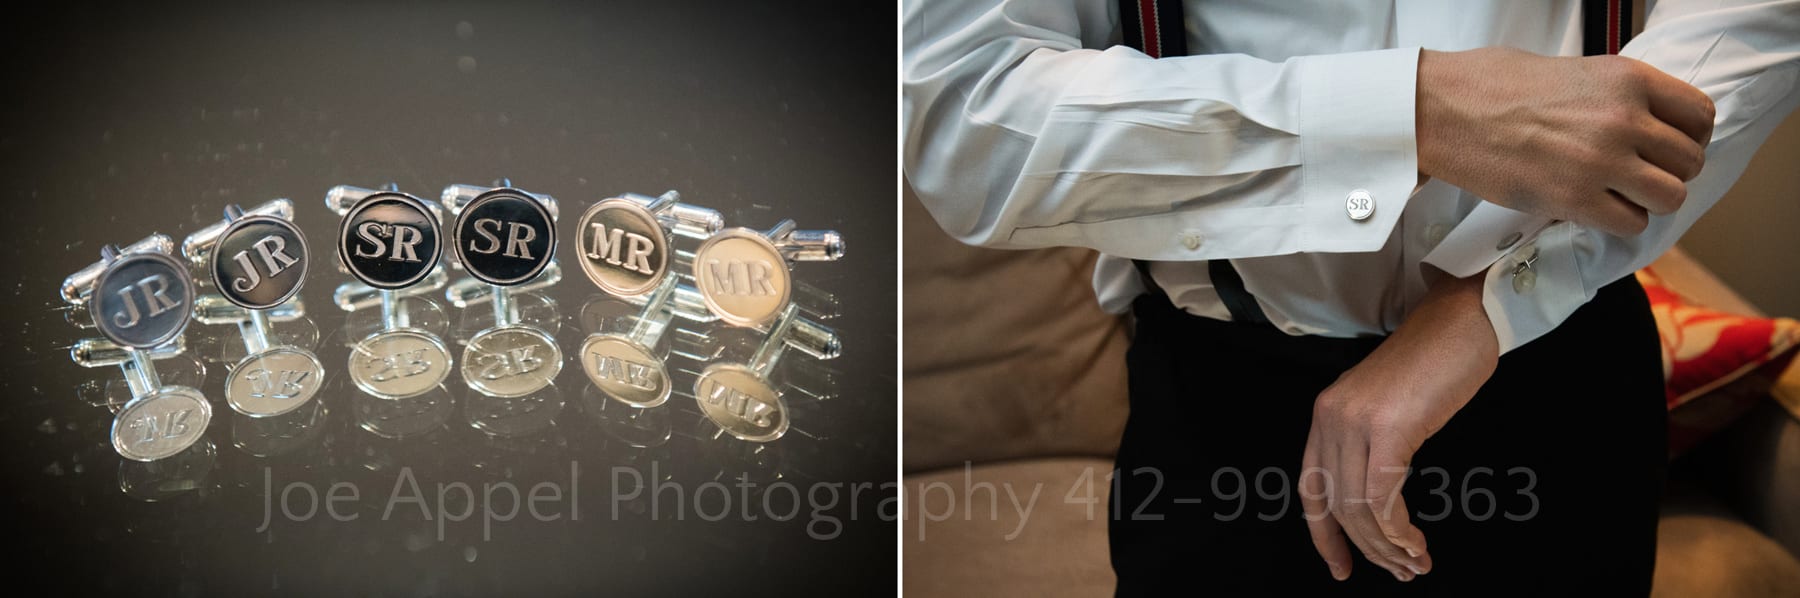 a grooms engraved cuff links are reflected on a glass table. Detail of the groom putting on the cuff links on his french cuff shirt.